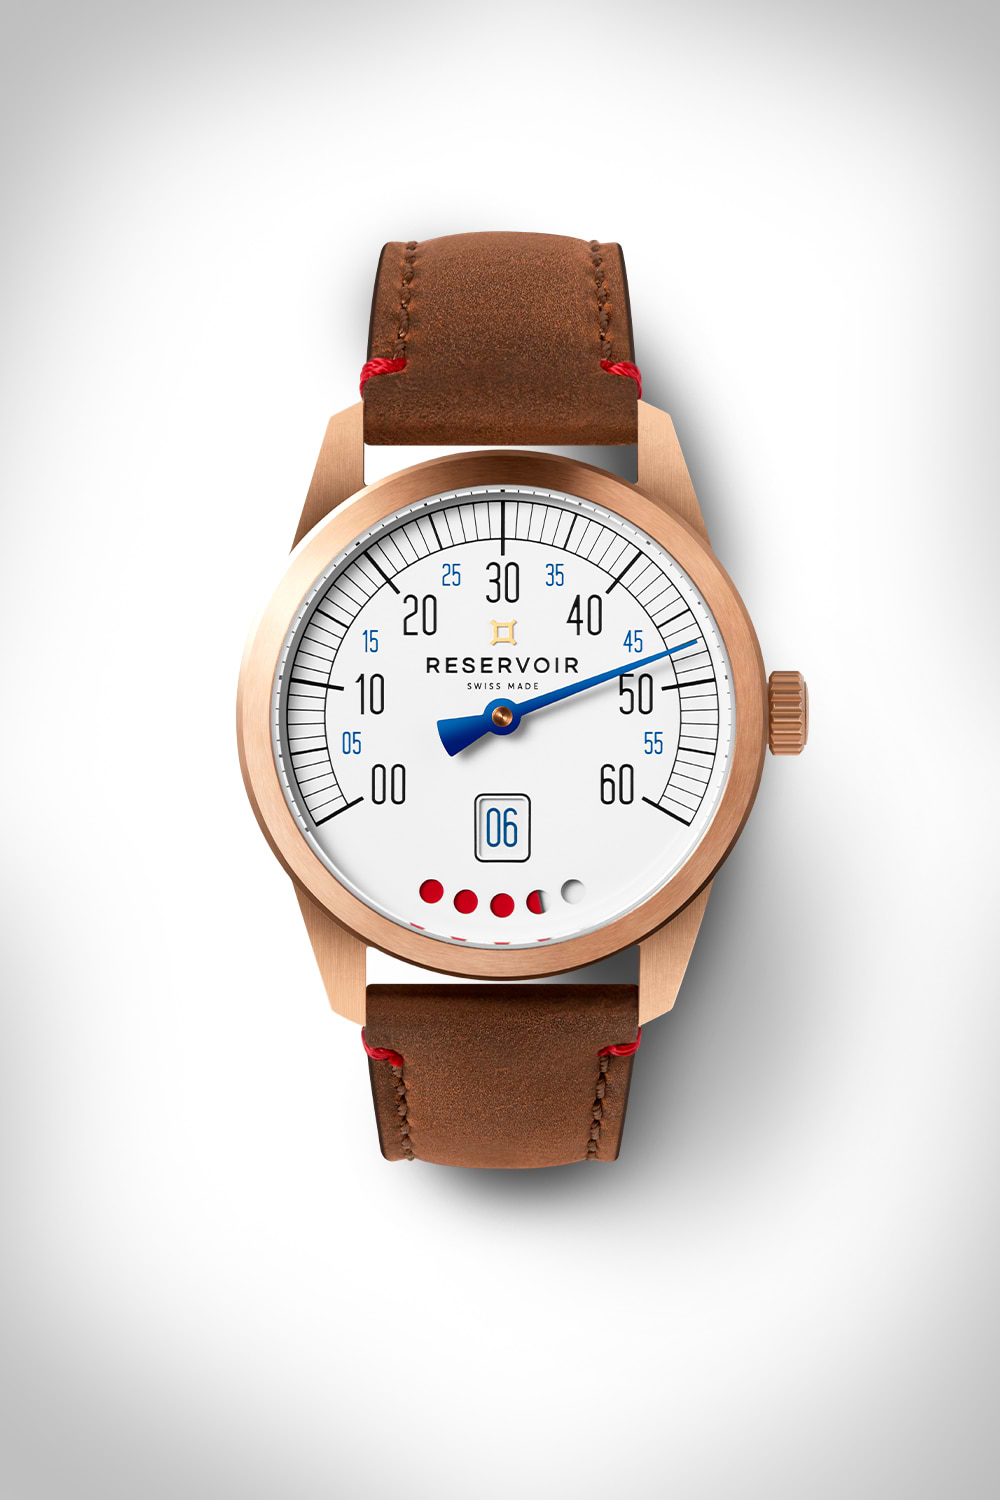 A wristwatch with a copper case, brown leather strap, white dial, and blue minute hand, brand Reservoir.